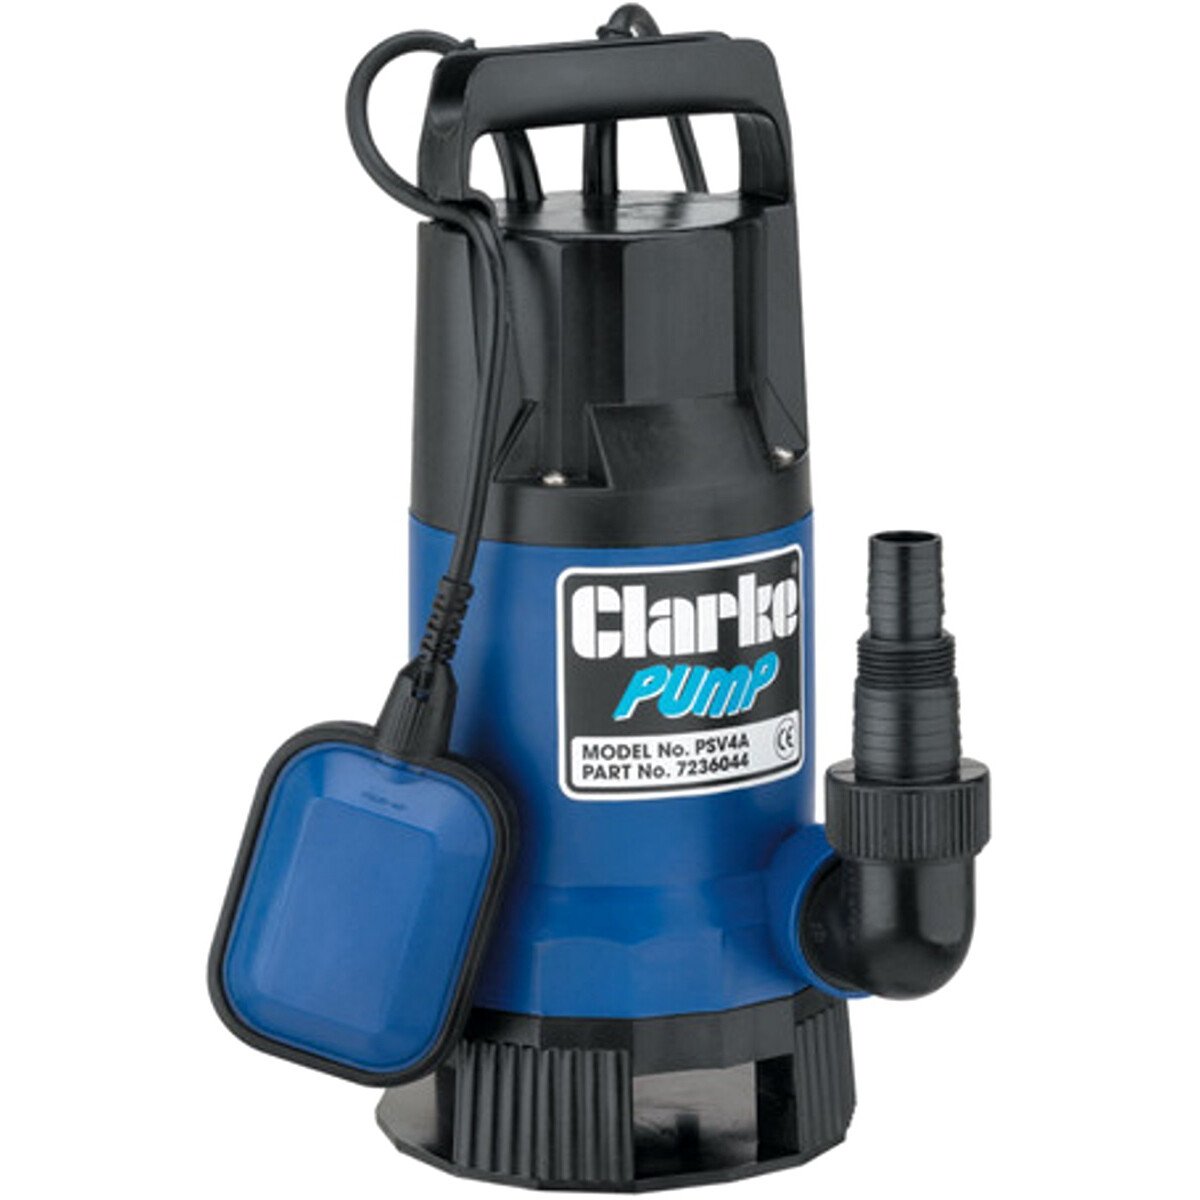 Clarke PSV4A Dirty Water Submersible Pump 750w 230V 7236044